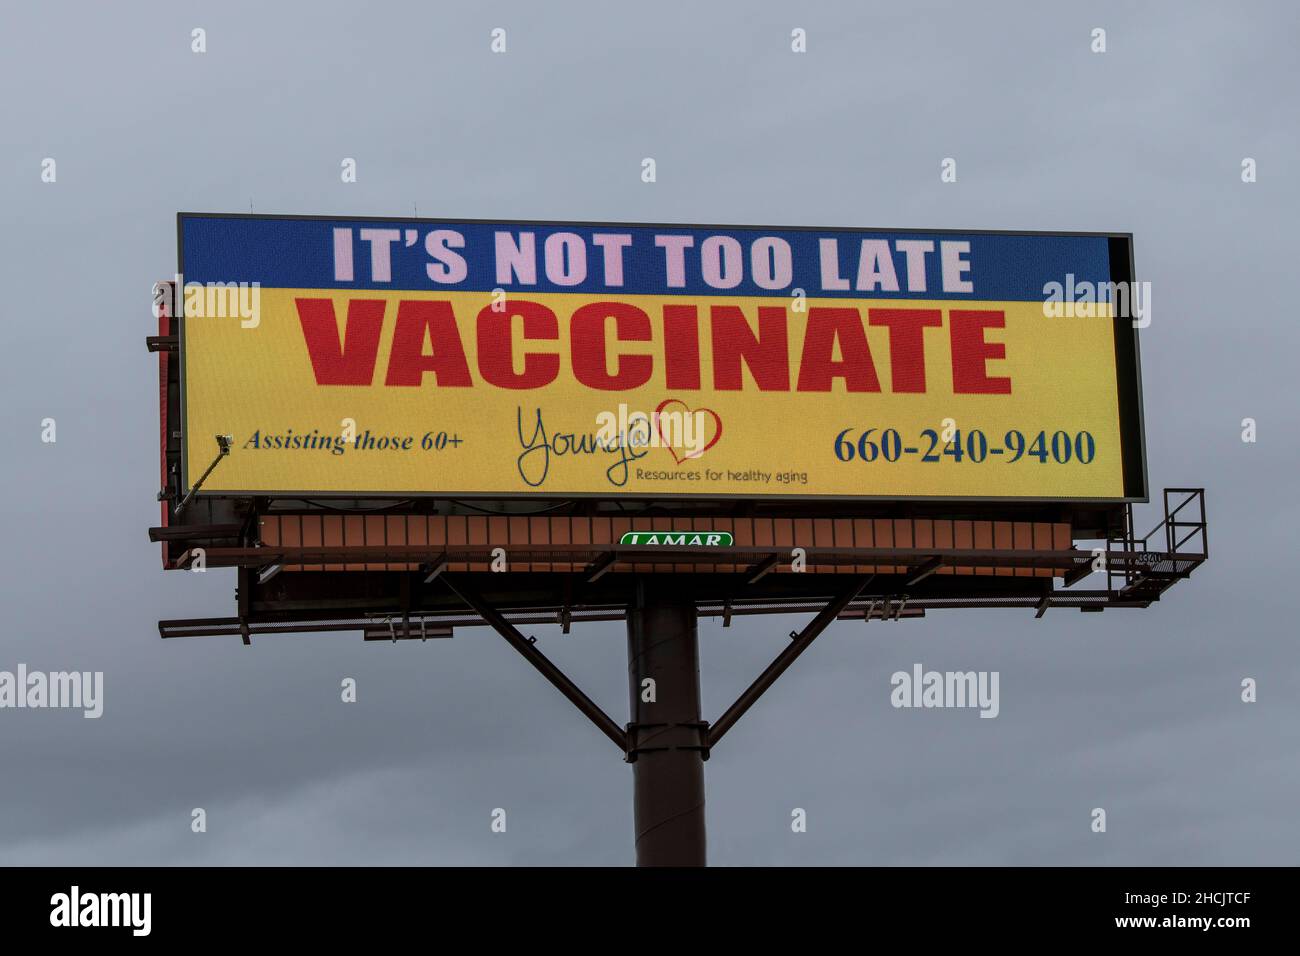 St. Joseph, Missouri. Its not to late to vaccinate on billboard sign. Stock Photo